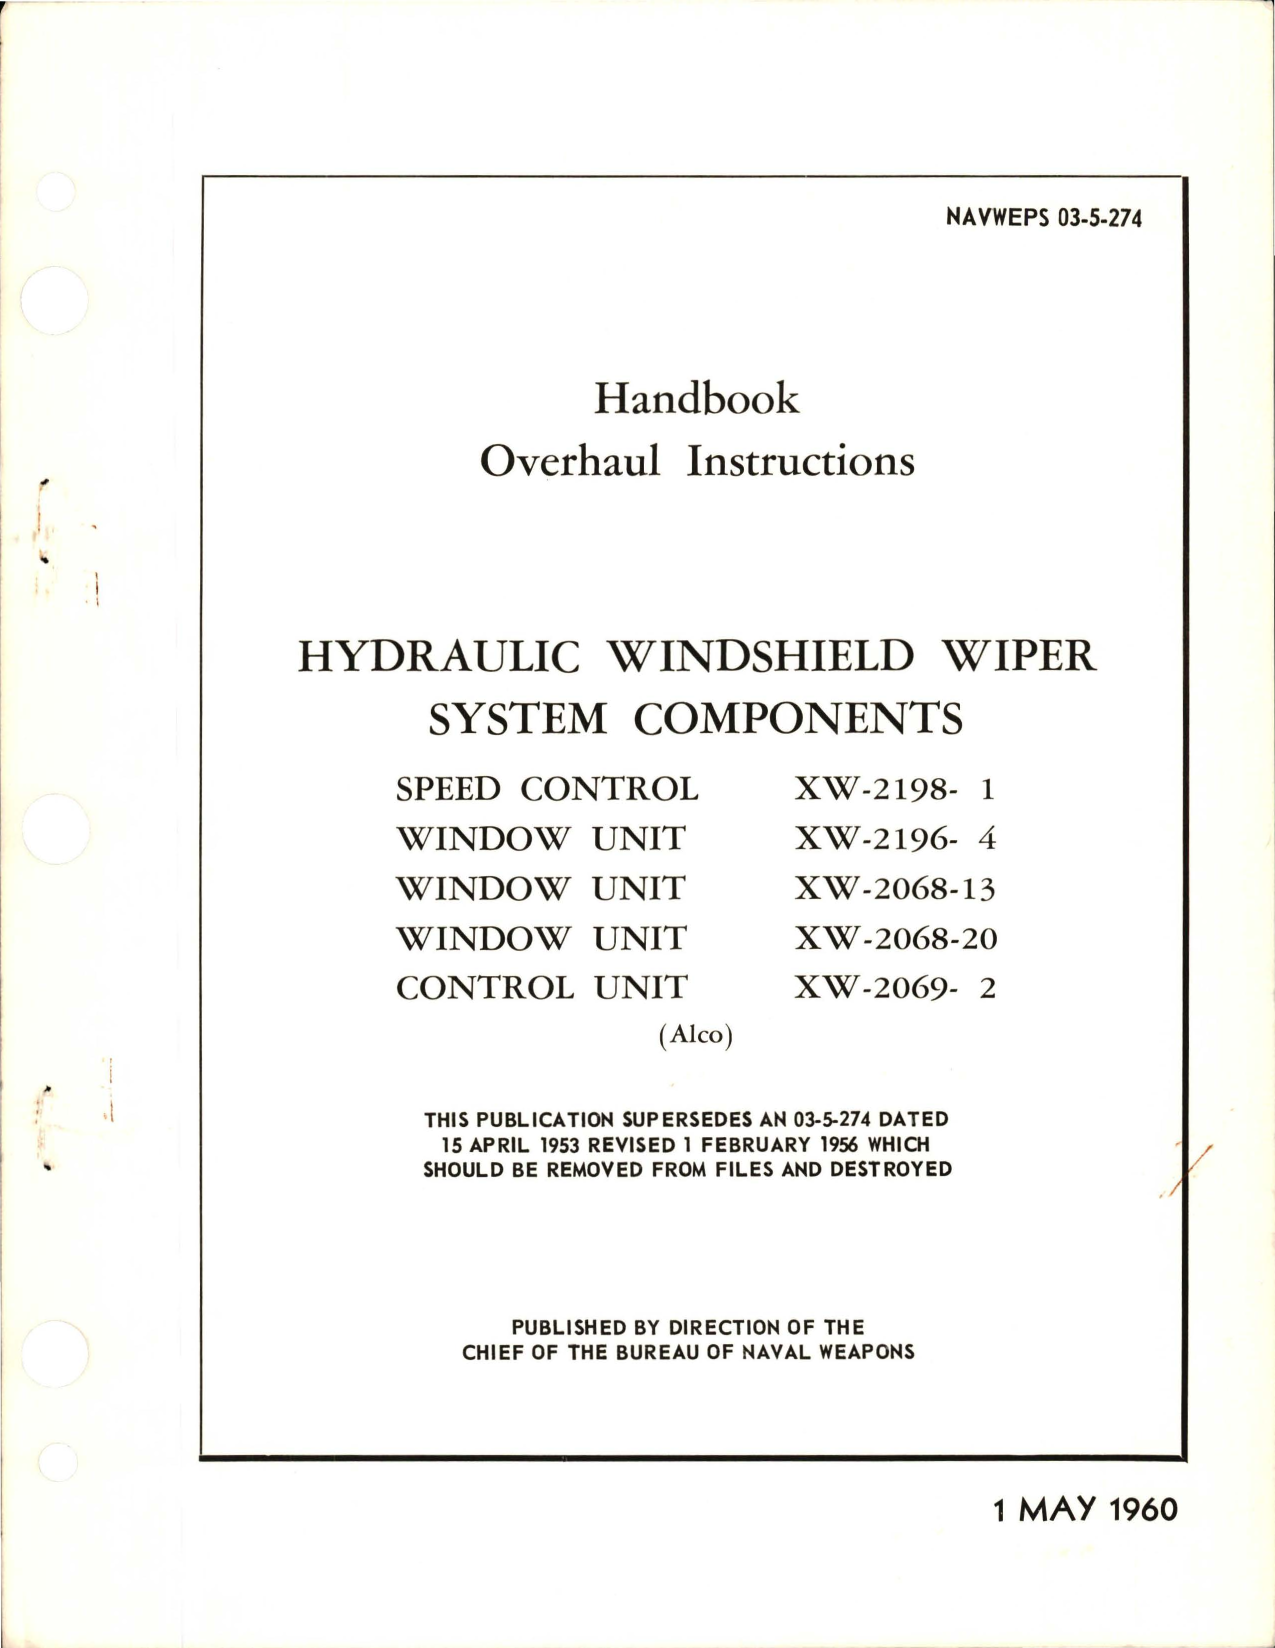 Sample page 1 from AirCorps Library document: Overhaul Instructions for Hydraulic Windshield Wiper Systems Components 